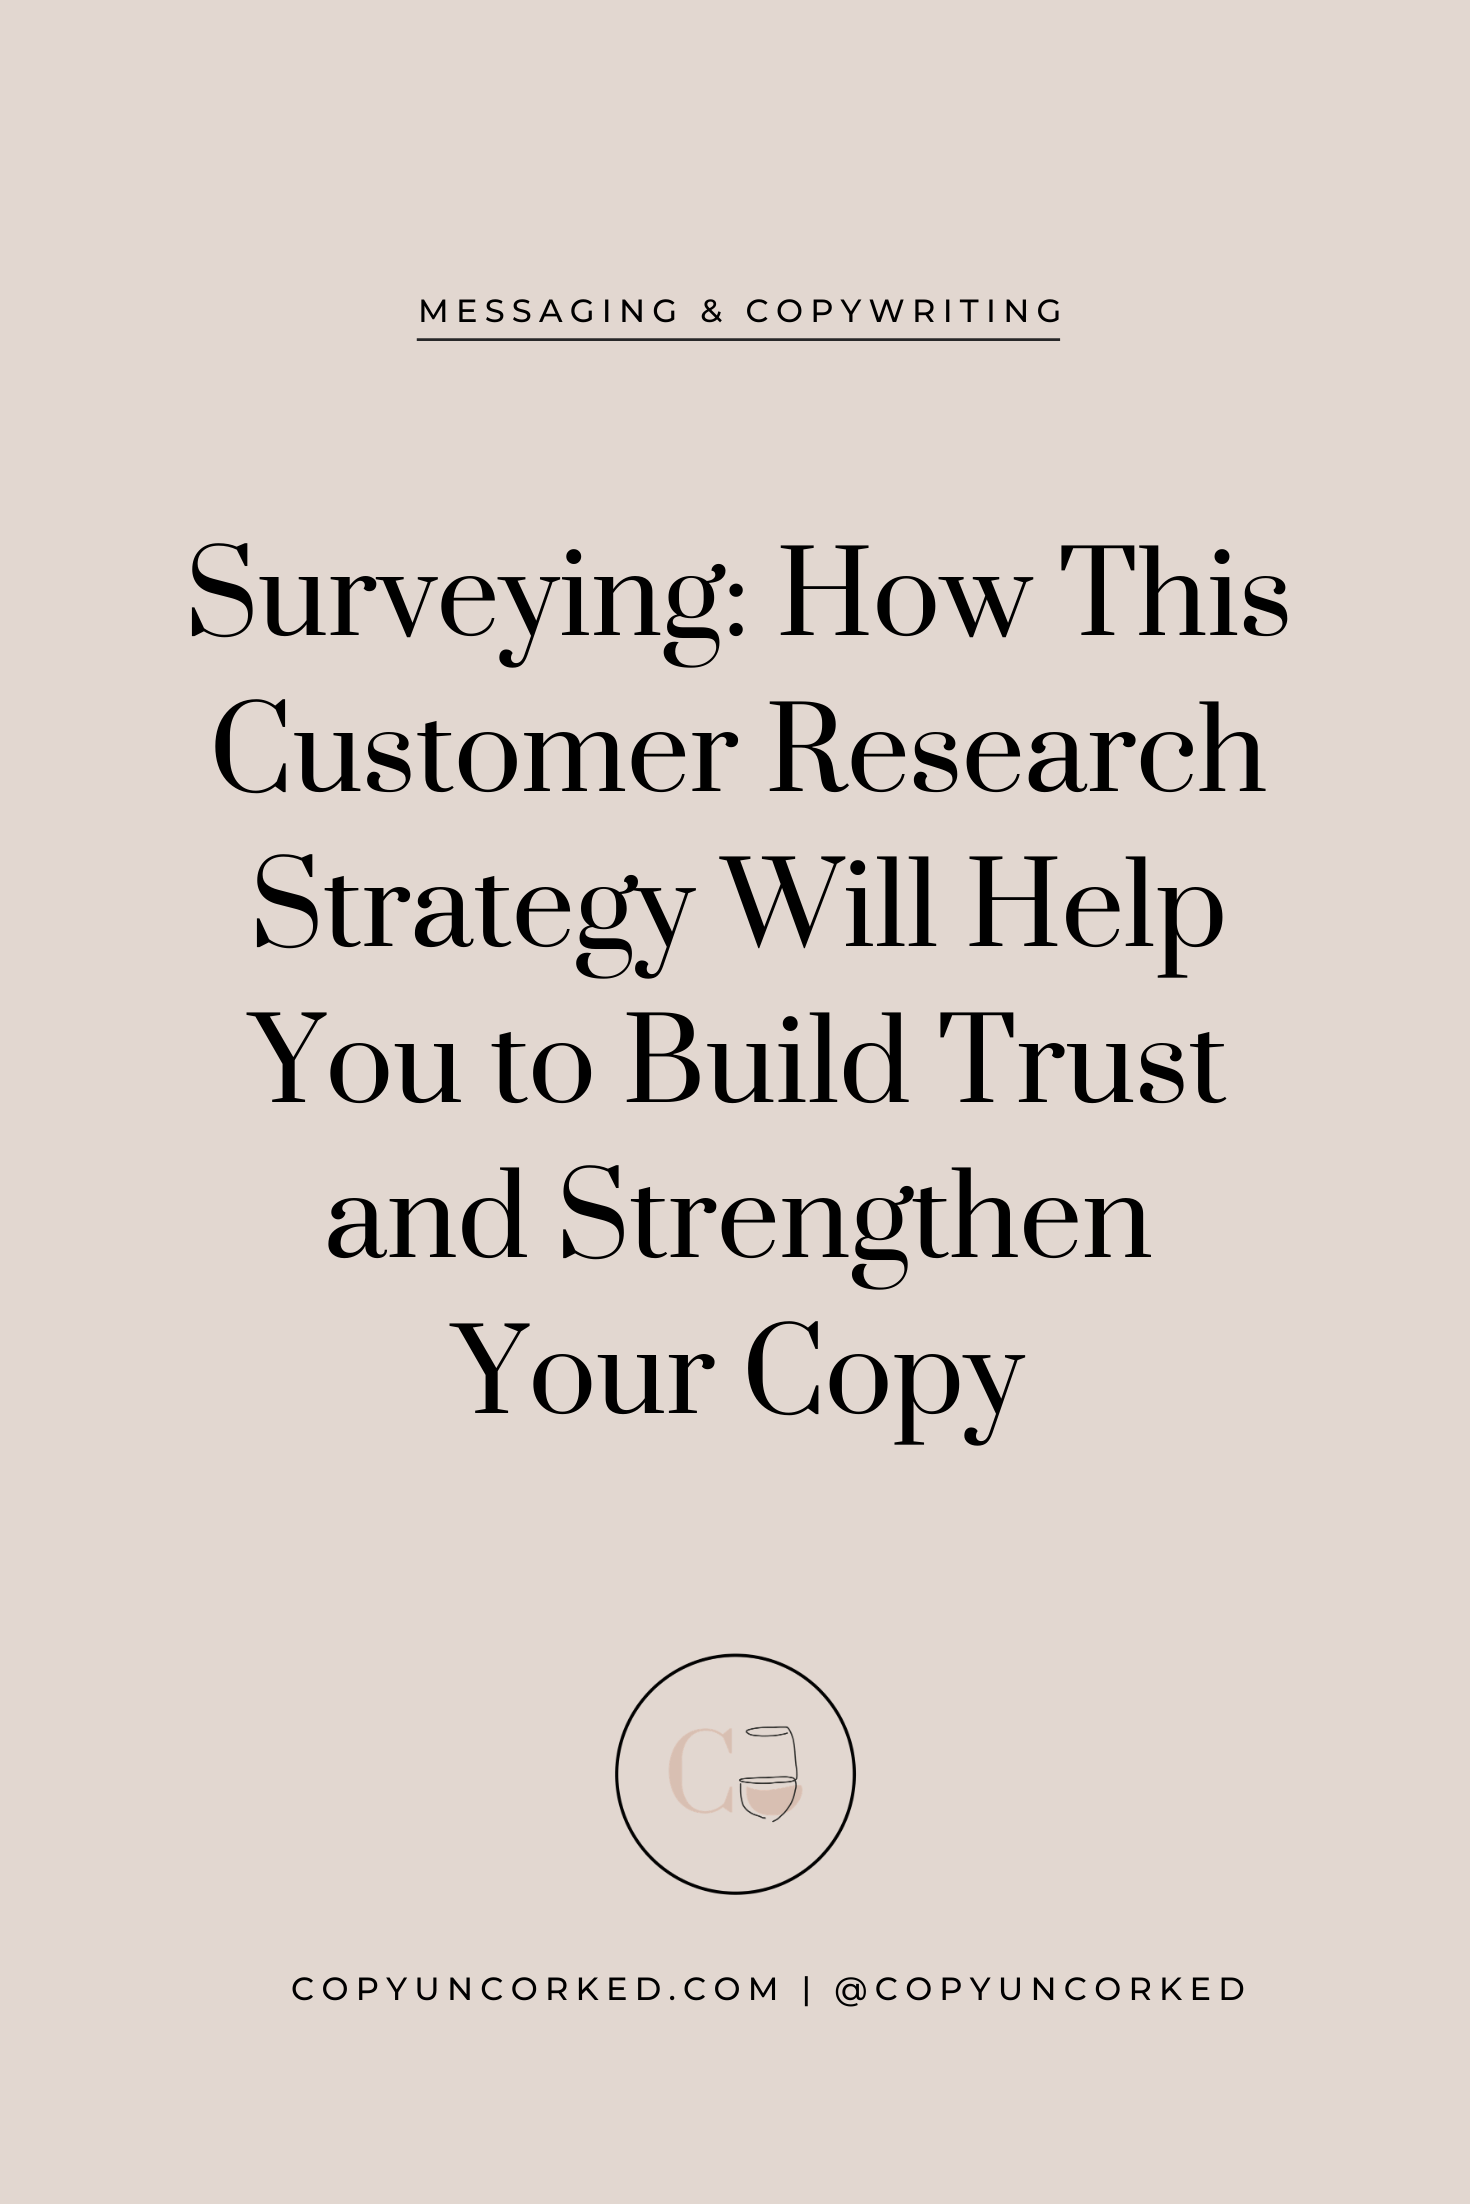 Surveying: How This Customer Research Strategy Will Help You to Build Trust and Strengthen Your Copy - copyuncorked.com